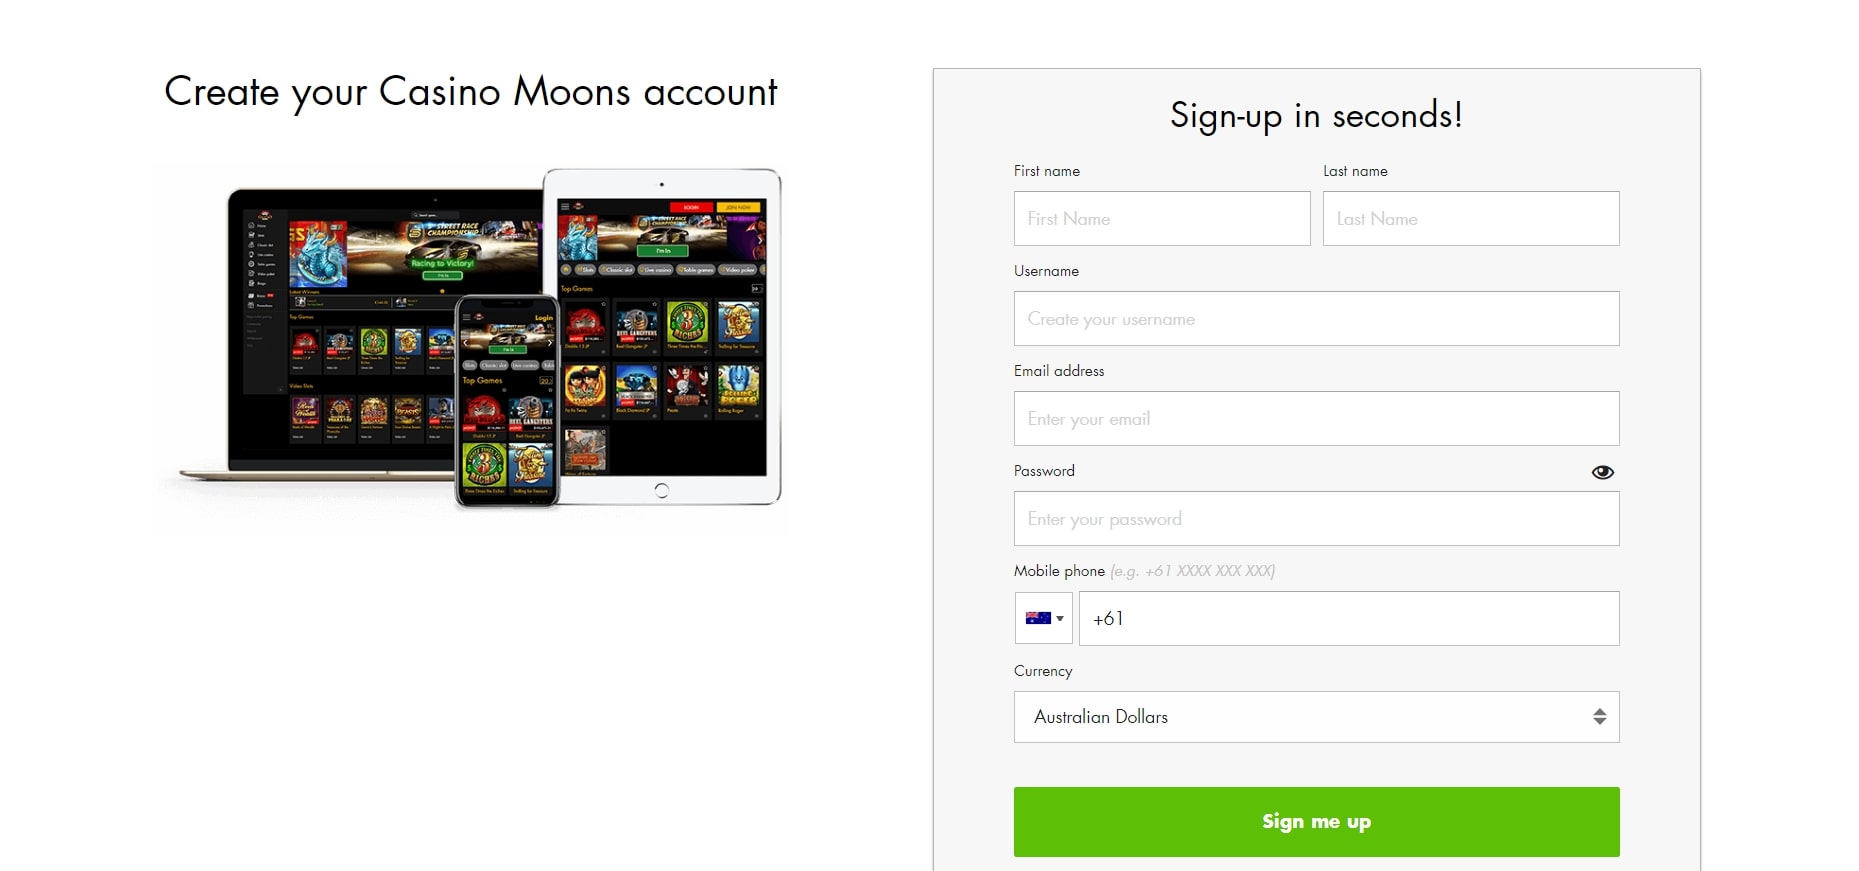 Sign Up to Win Real Money Online at Casino Moons